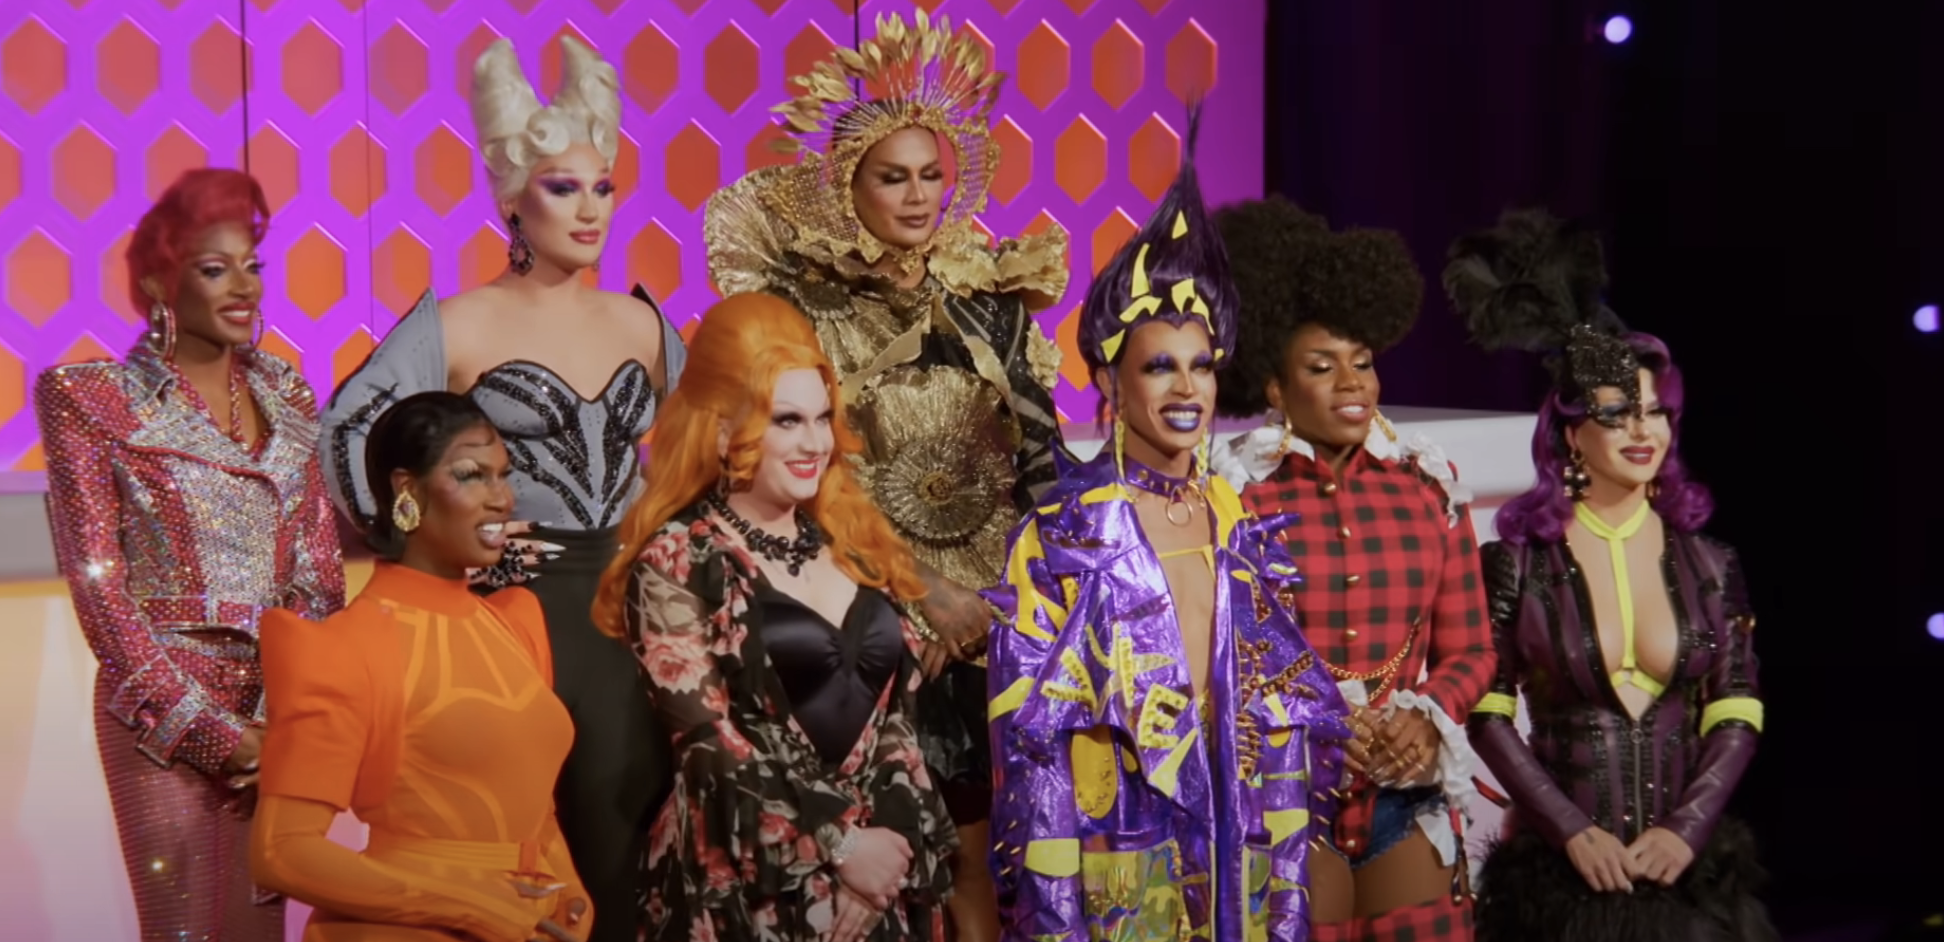 the contestants grouped together for judging